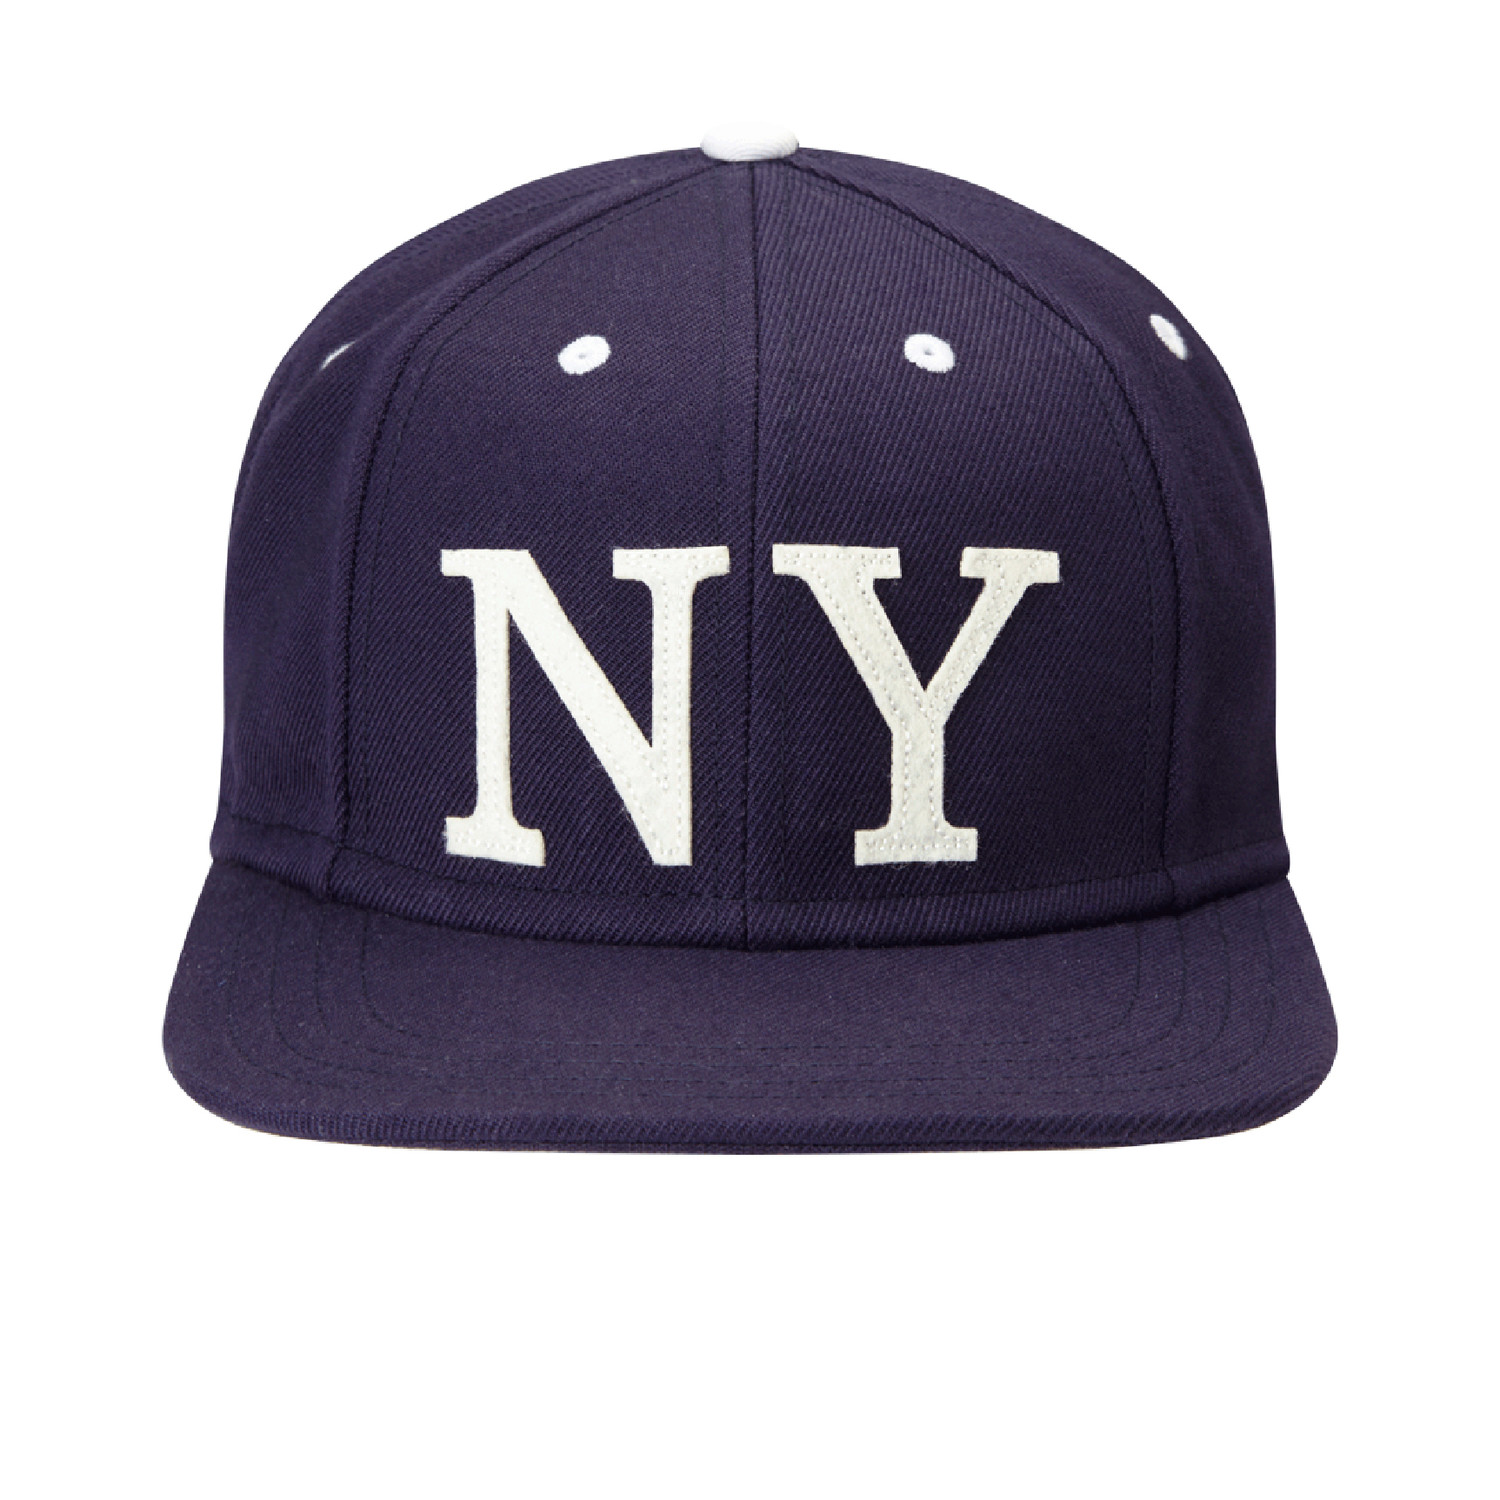 Ace NY Baseball Cap // Blue + White - Gents Co. - Touch of Modern